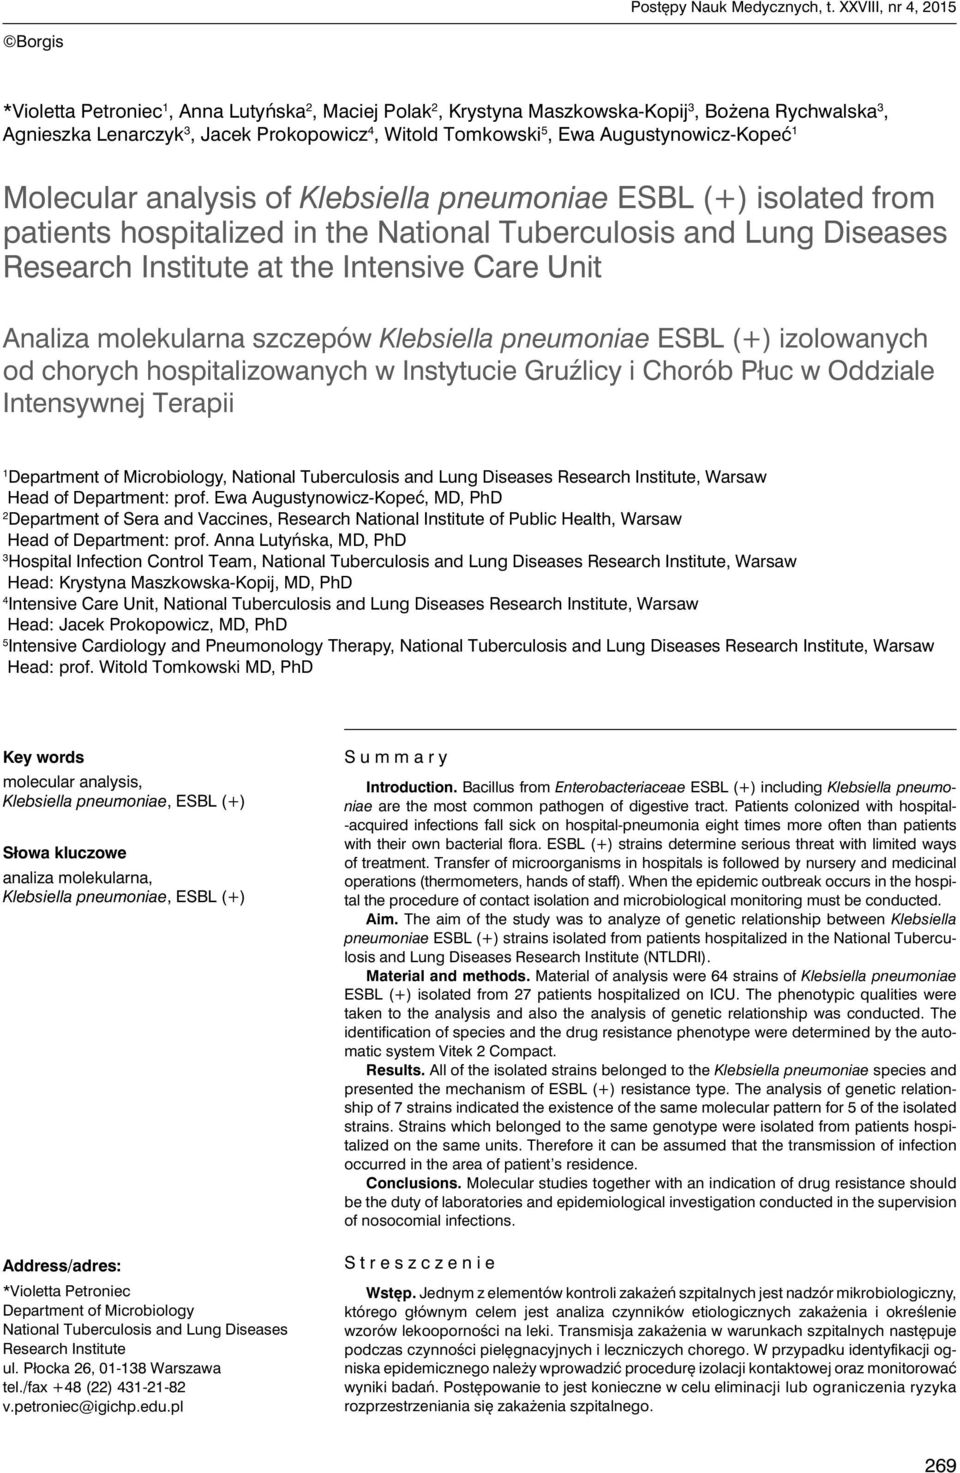 Augustynowicz-Kopeć 1 Molecular analysis of Klebsiella pneumoniae ESBL (+) isolated from patients hospitalized in the National Tuberculosis and Lung Diseases Research Institute at the Intensive Care